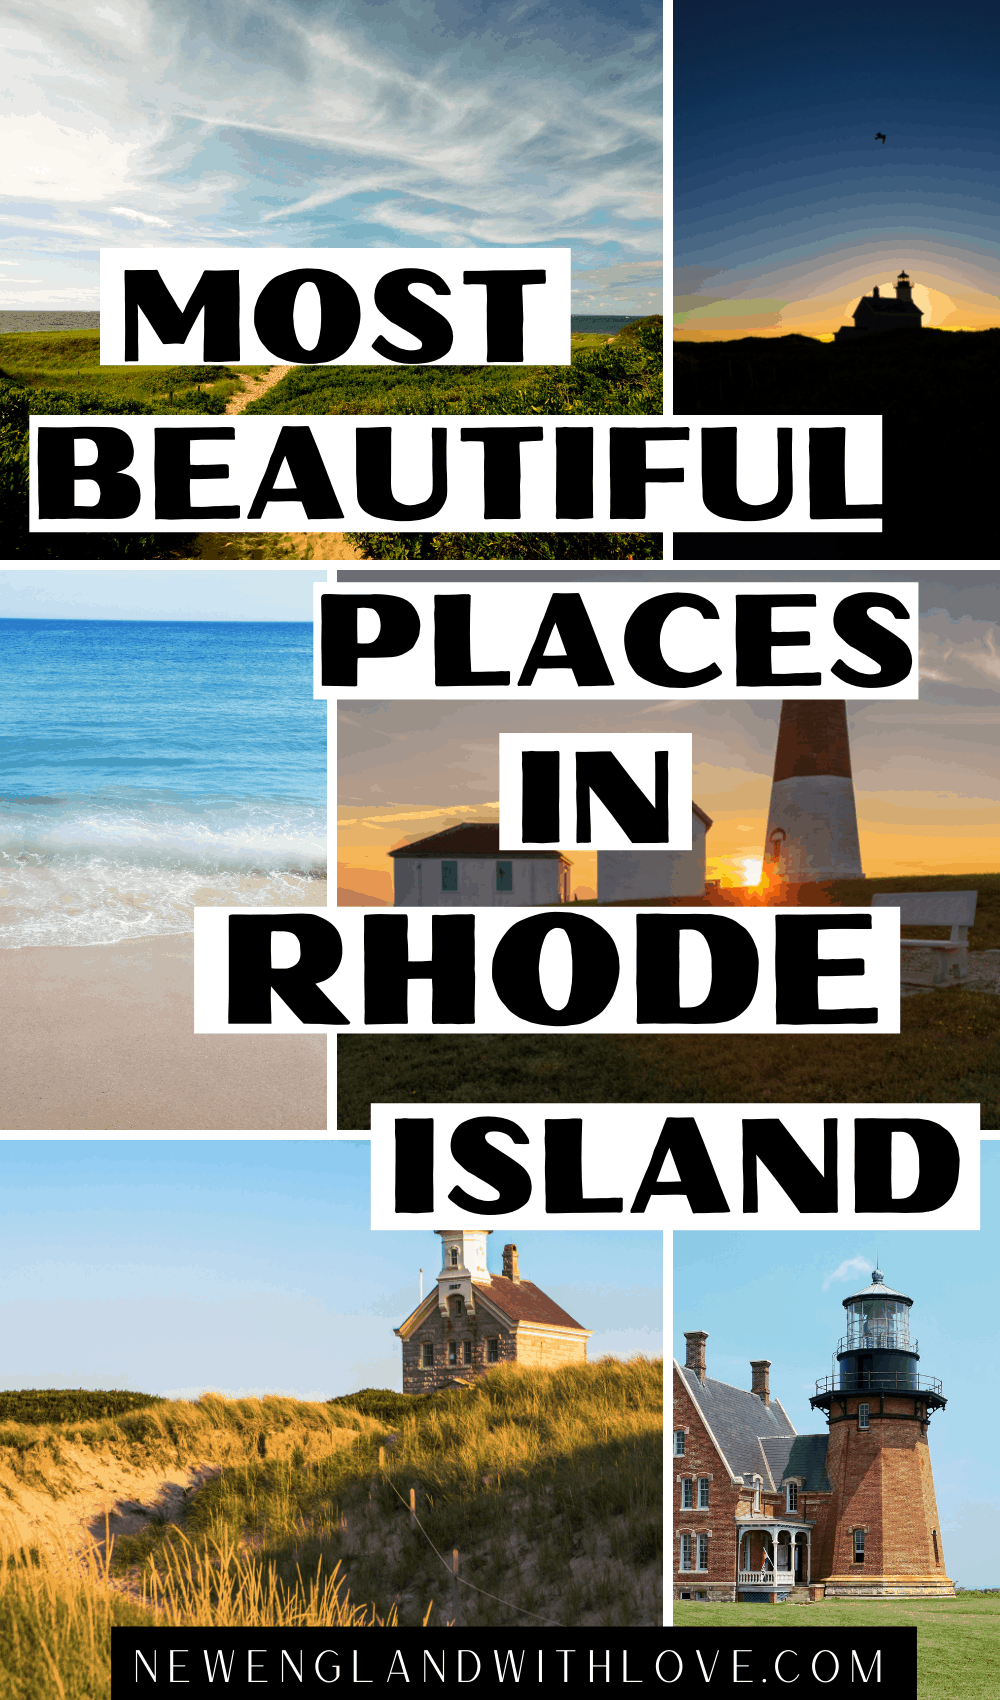 Pinterest graphic reading "Most beautiful places in Rhode Island"